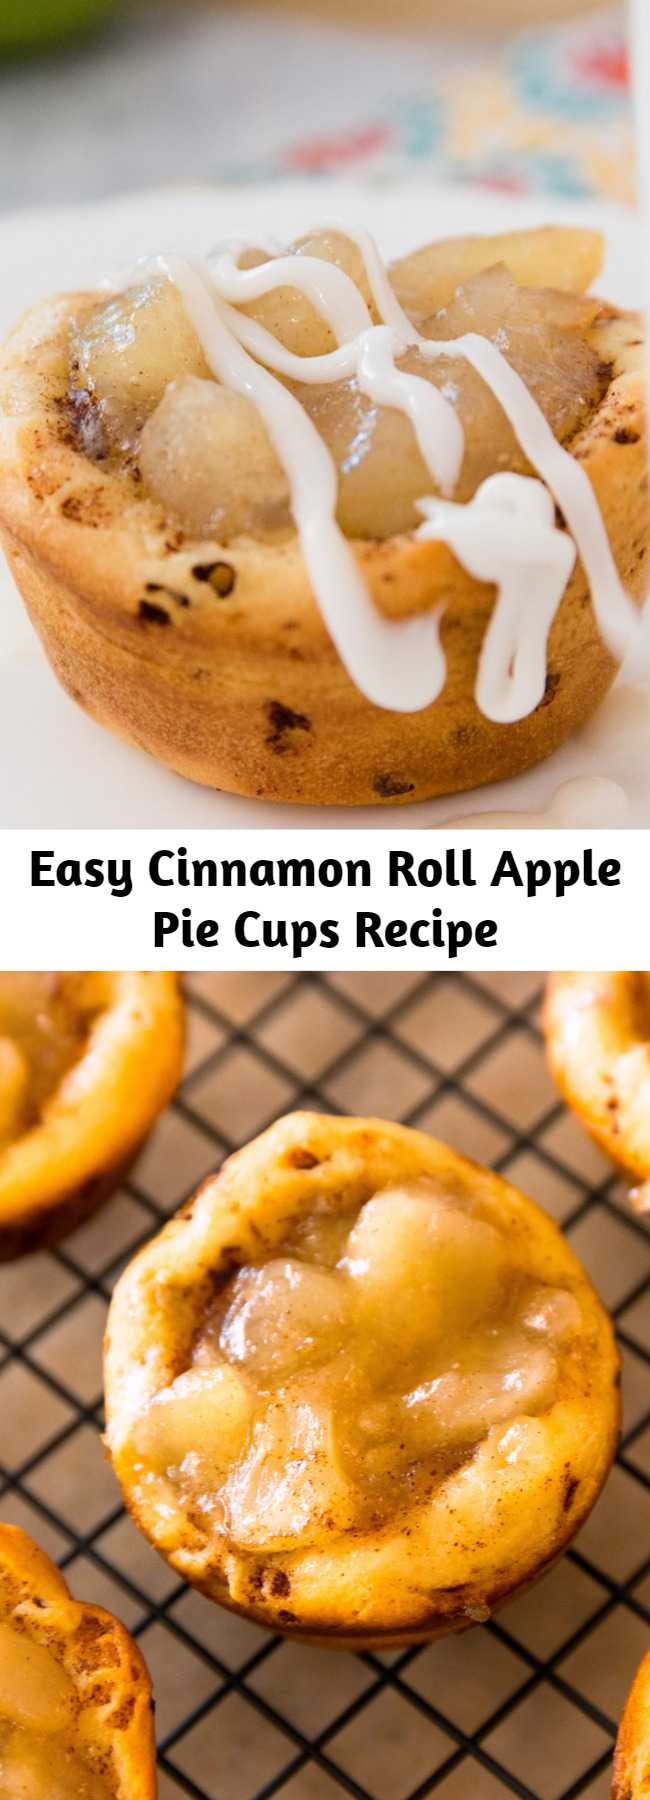 Easy Cinnamon Roll Apple Pie Cups Recipe - These Cinnamon Roll Apple Pie Cups are always a hit with their pillowy soft crust and velvety filling! This easy apple dessert needs just 3 ingredients and is ready in 25 minutes. They’re fabulous anytime and perfect for parties, potlucks and holidays!